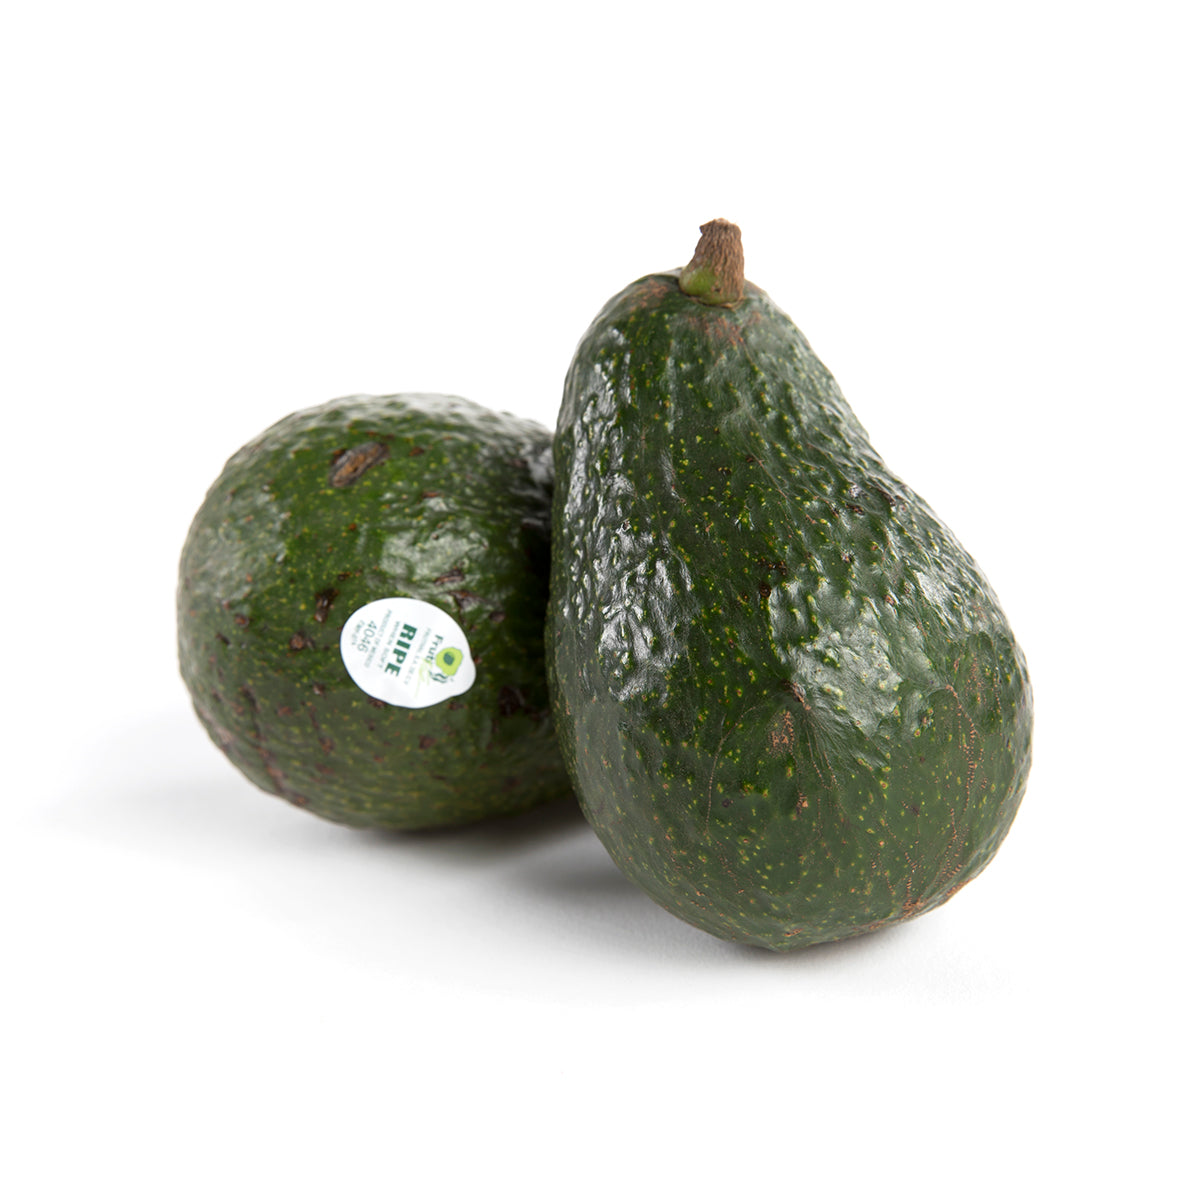 Avocados From Mexico Firm Hass Avocados 60 Ct